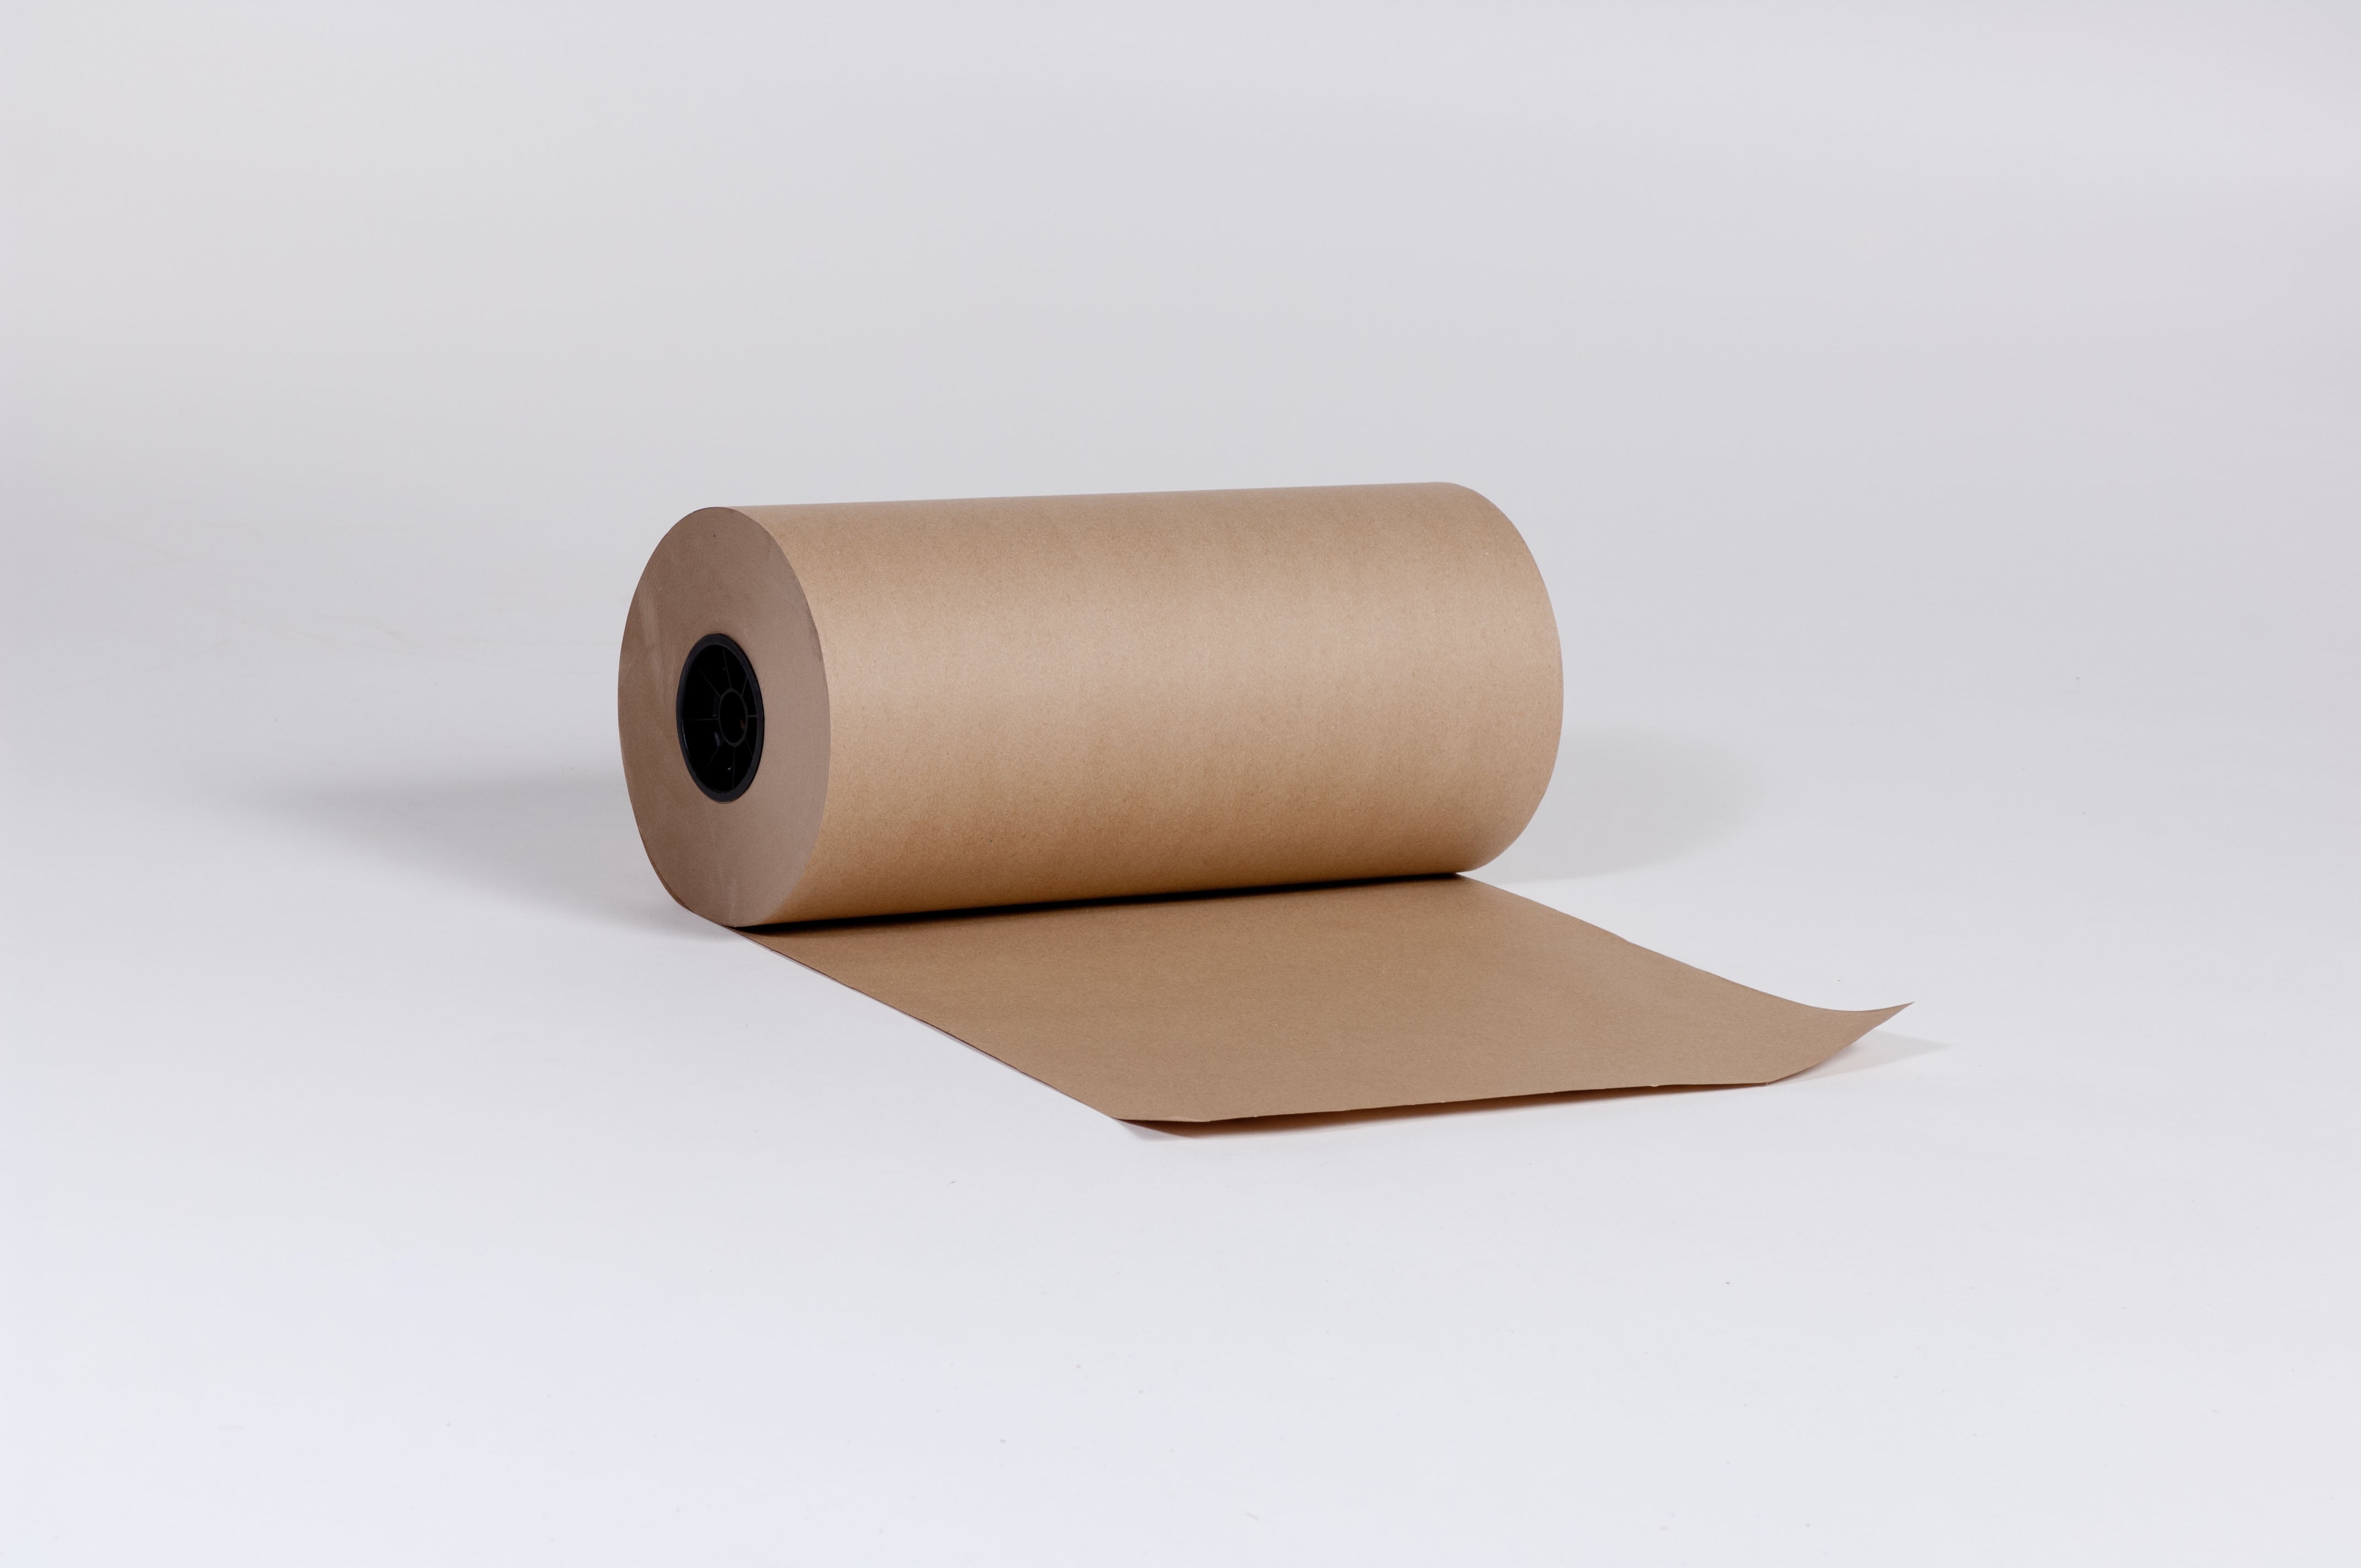 Heavyweight Wrapping Paper Roll - 36 x720' - Sam's Club